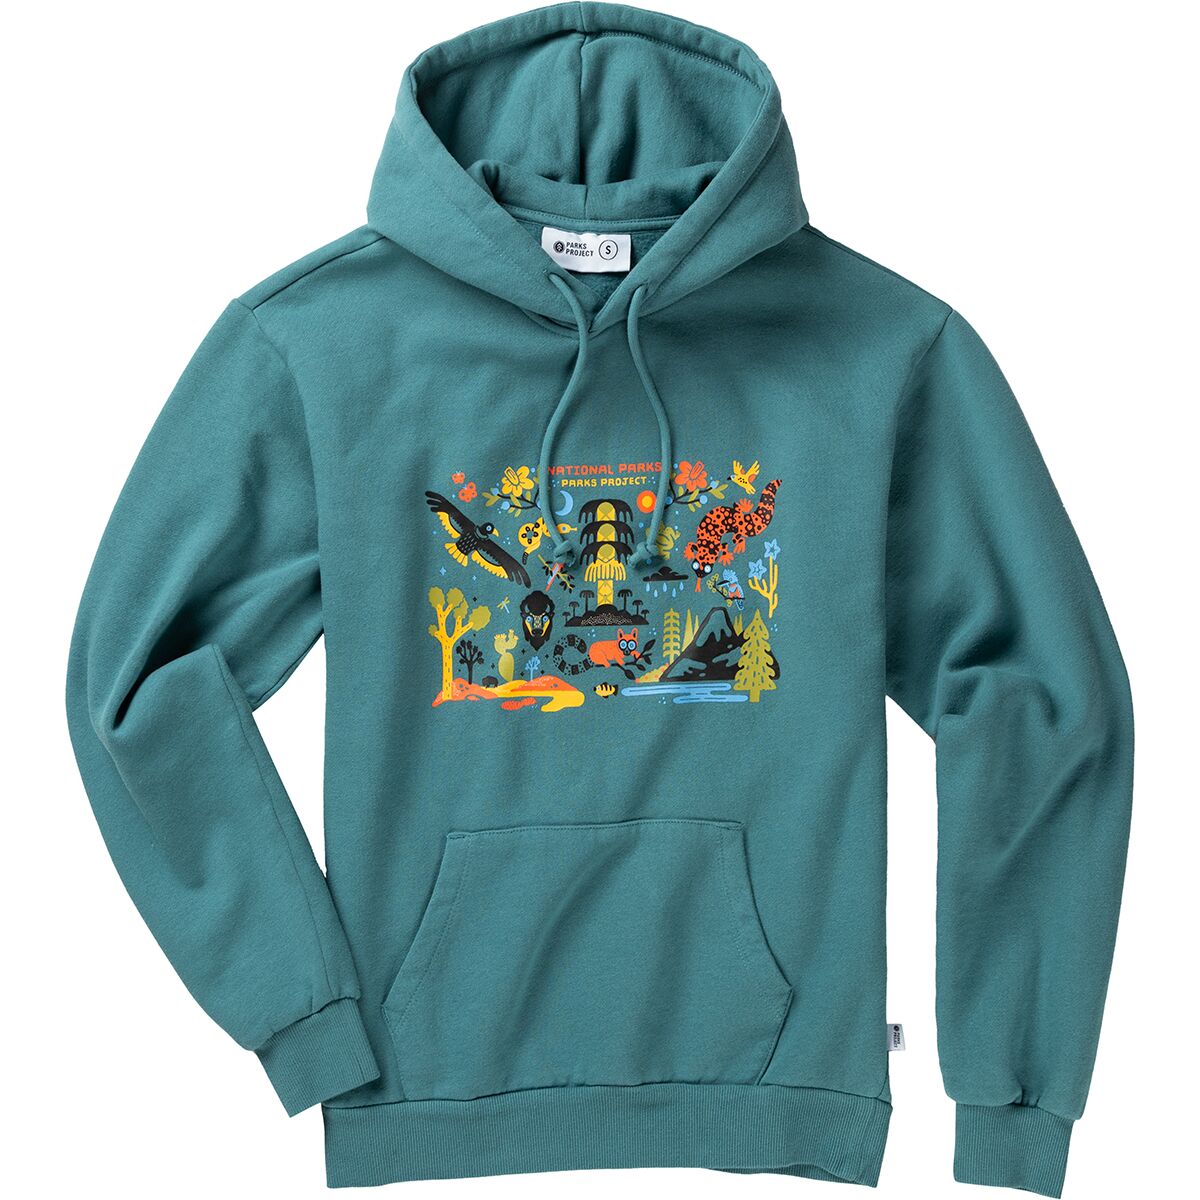 Parks Project All Parks Founded Hoodie - Men's